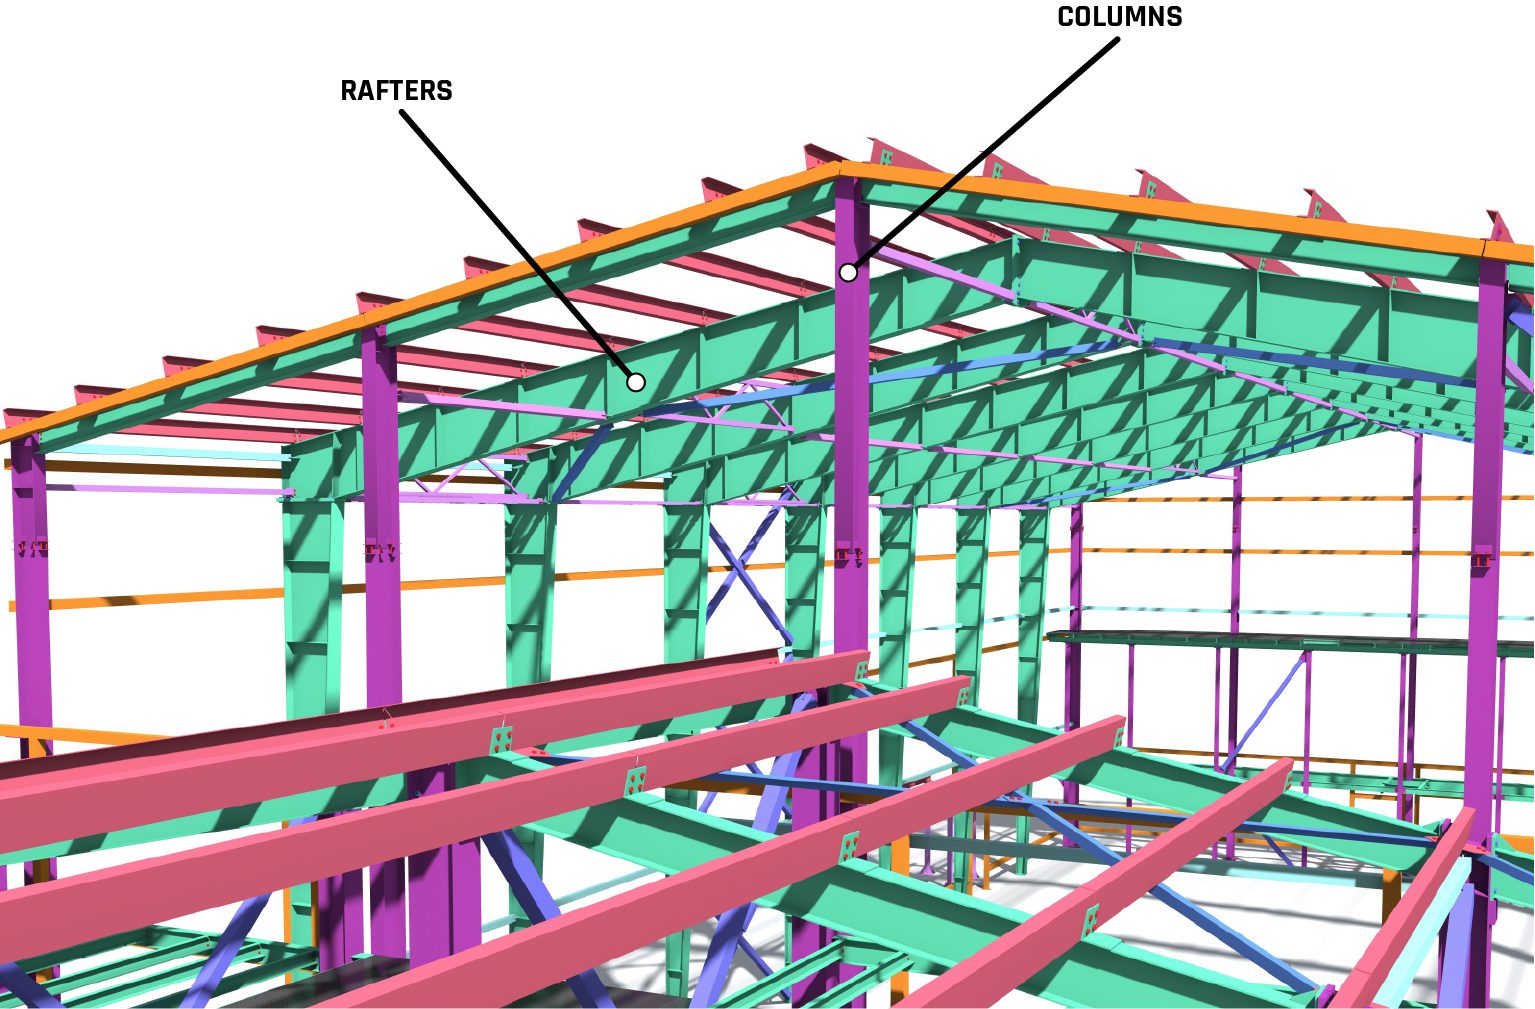 Drawing of a steel building framework